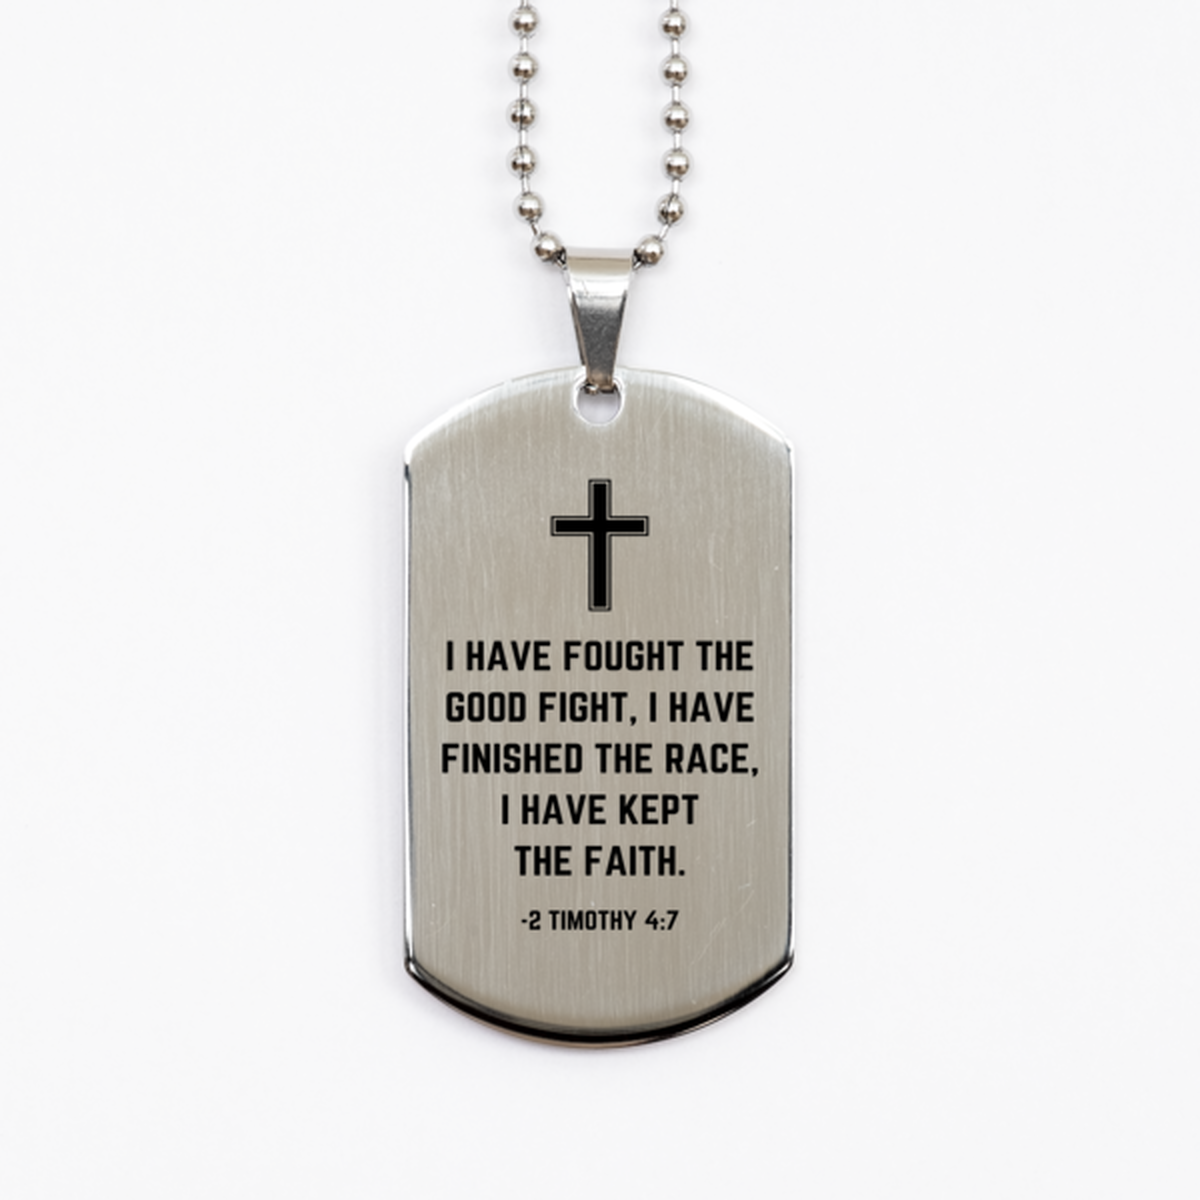 Baptism Gifts For Teenage Boys Girls, Christian Bible Verse Silver Dog Tag, I have fought the good fight, Confirmation Gifts, Bible Verse Necklace for Son, Godson, Grandson, Nephew